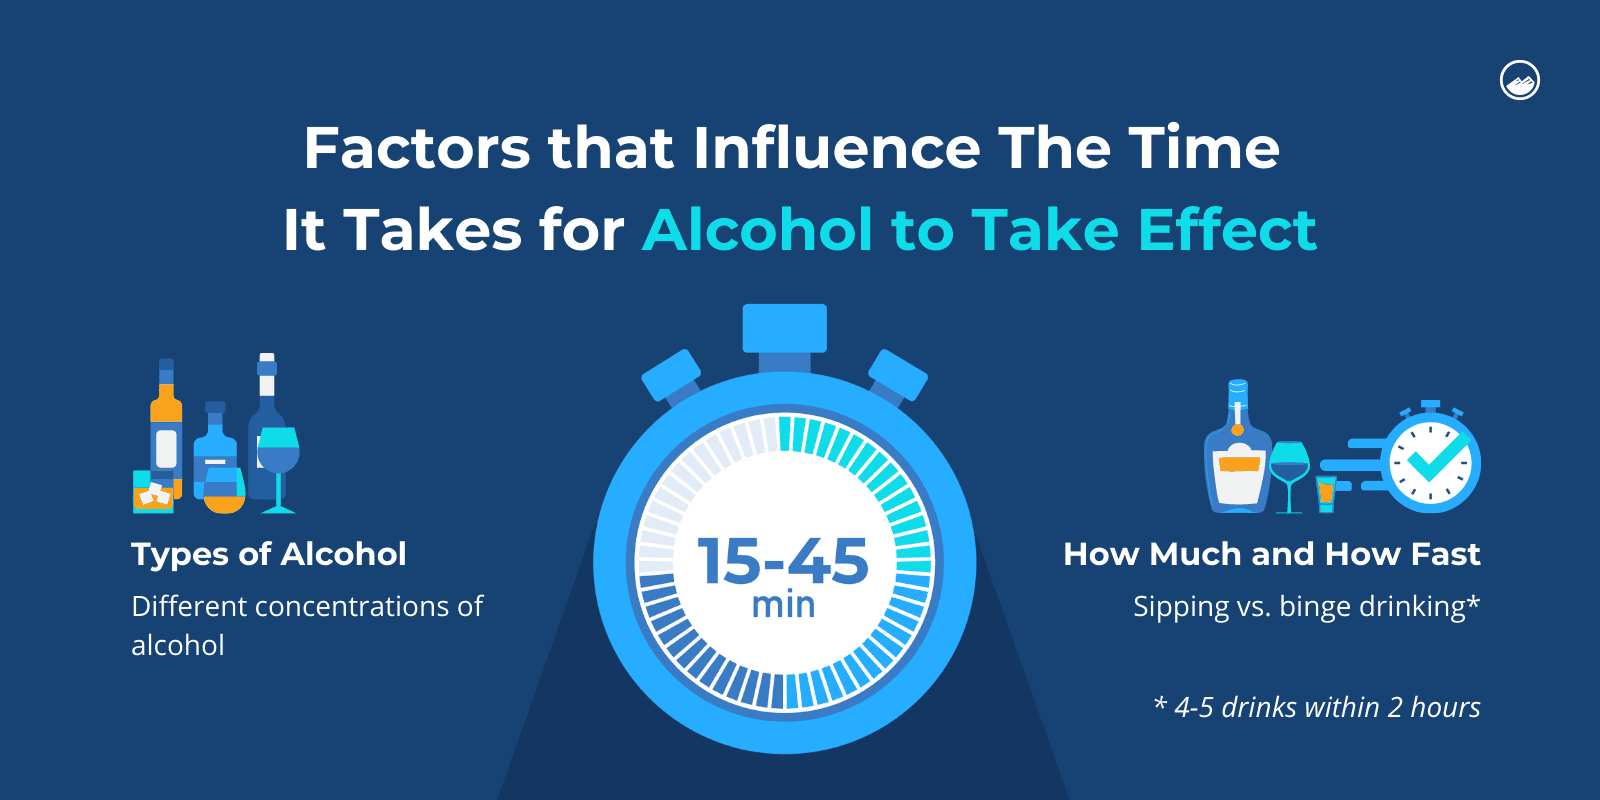 How Long Does Alcohol Stay In Your System?